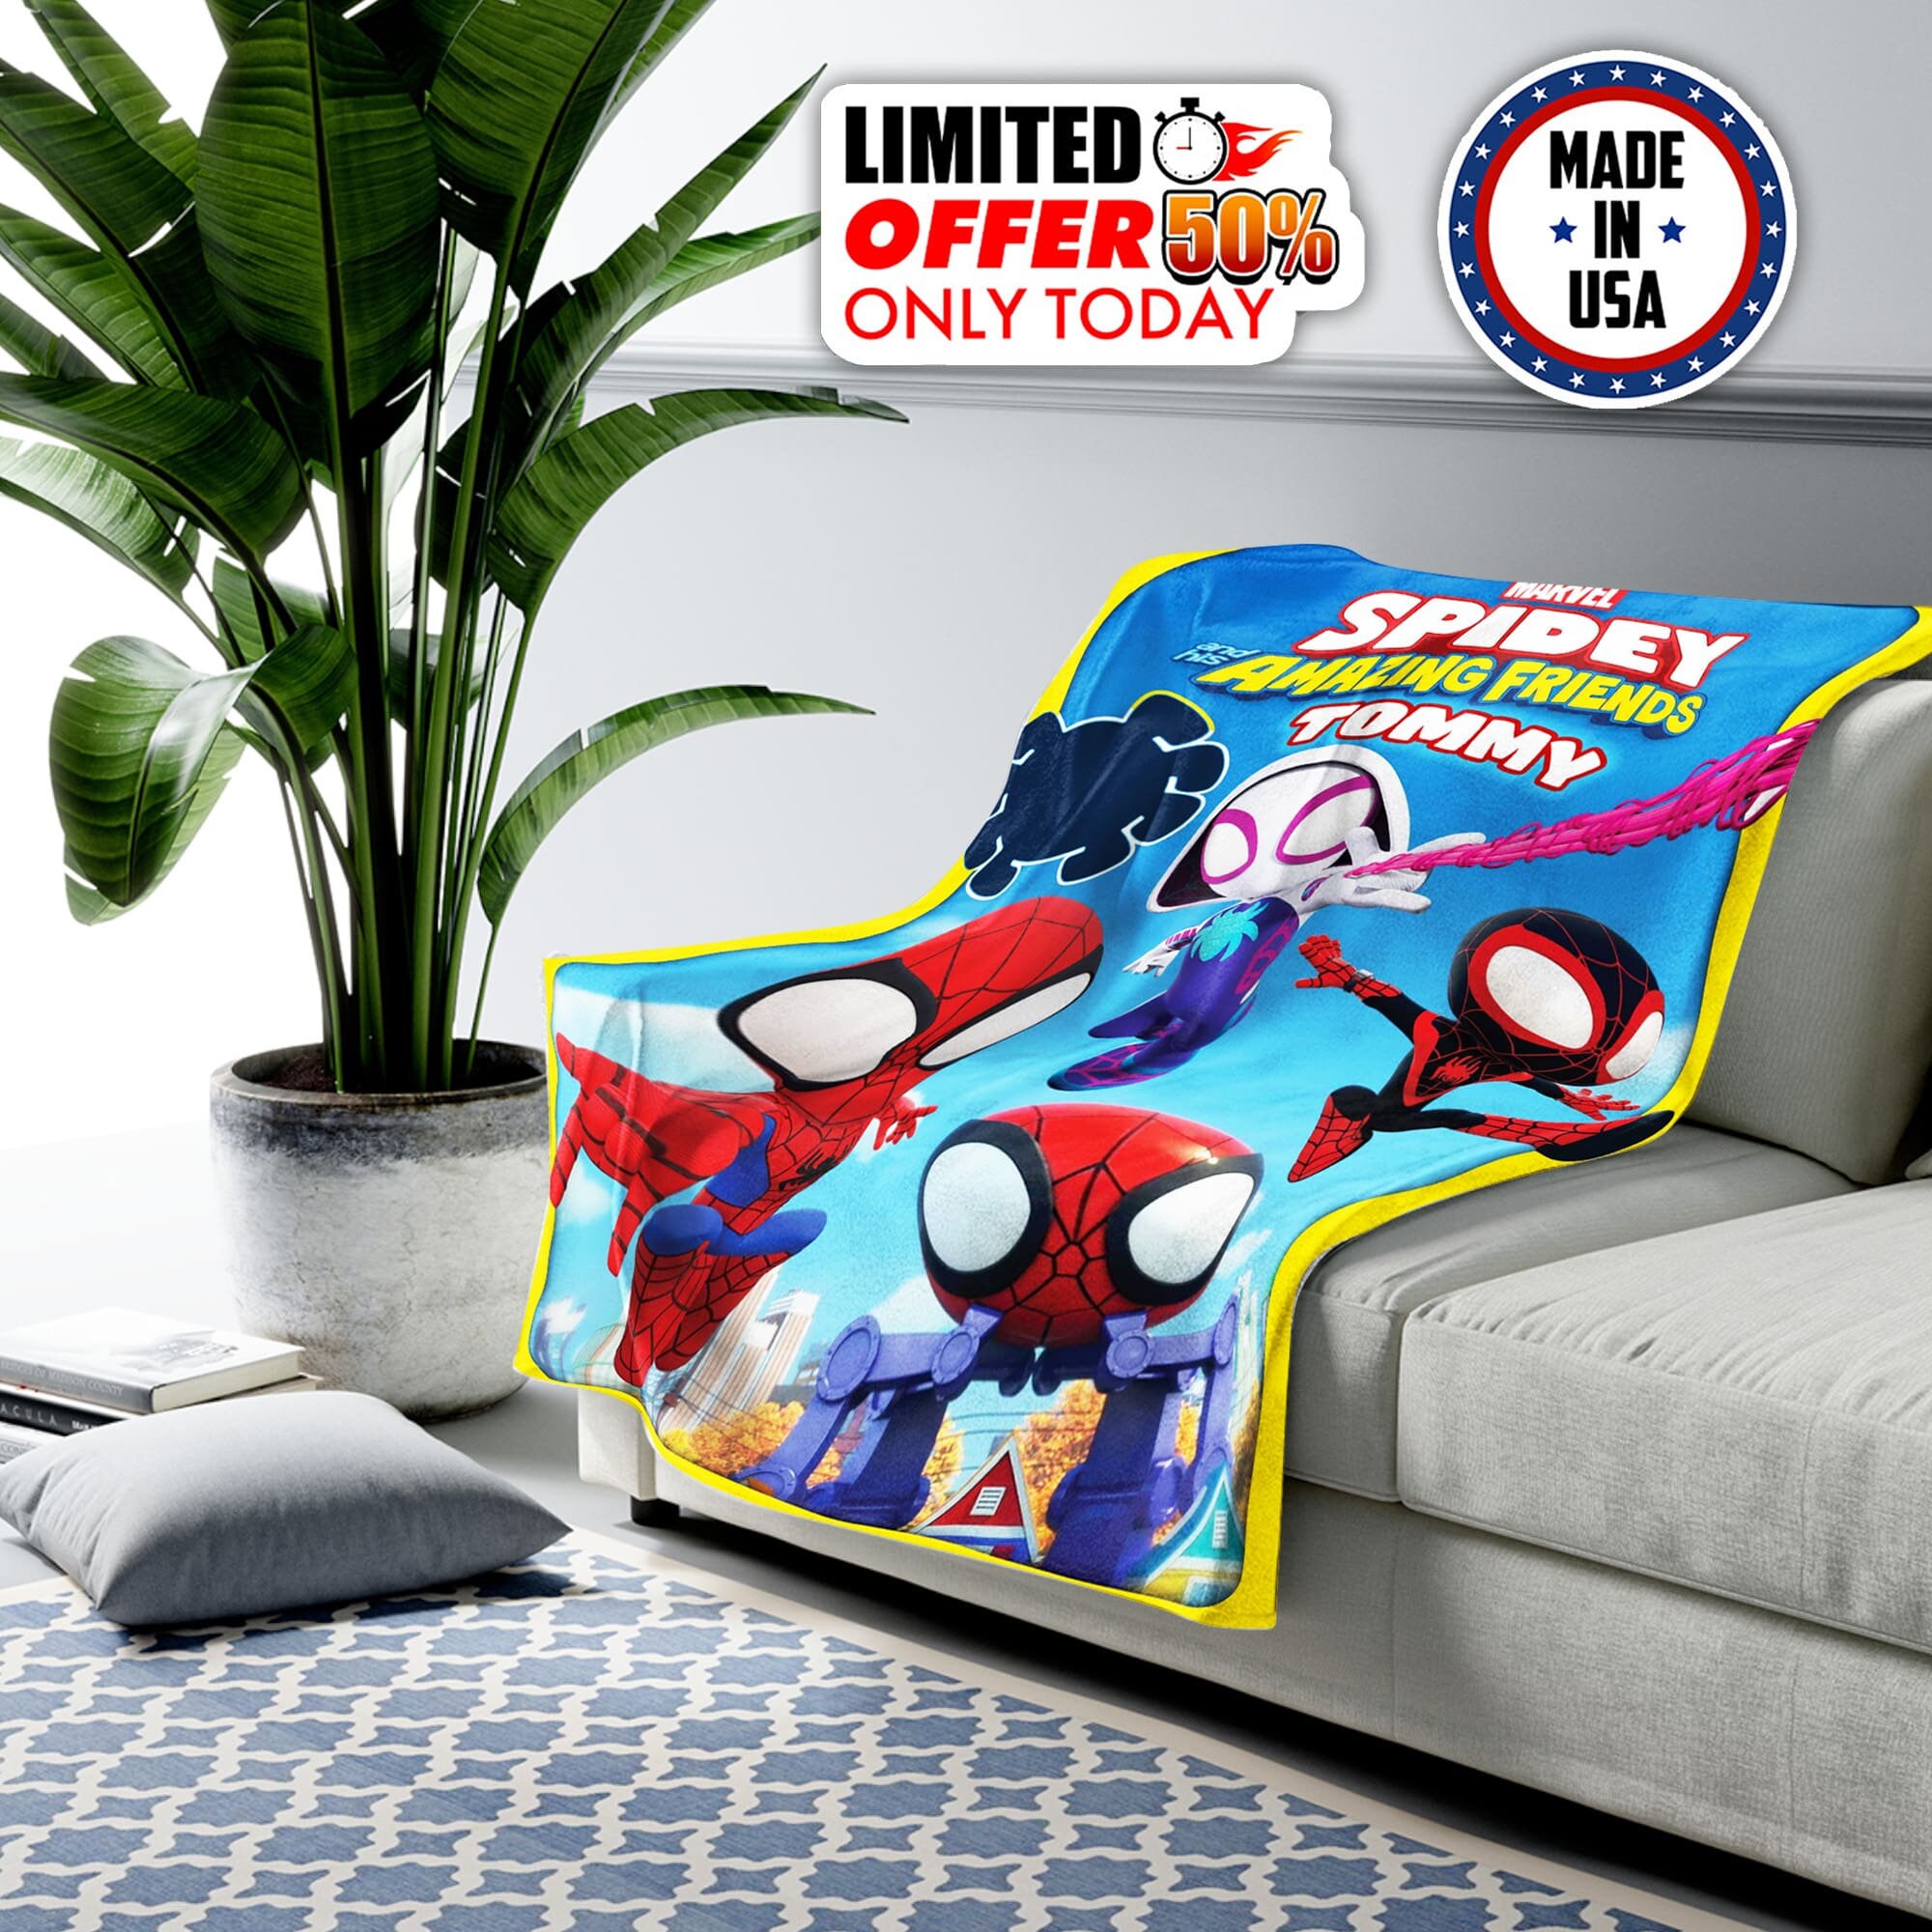 Spidey and His Amazing Friends Personalized Fleece Blanket